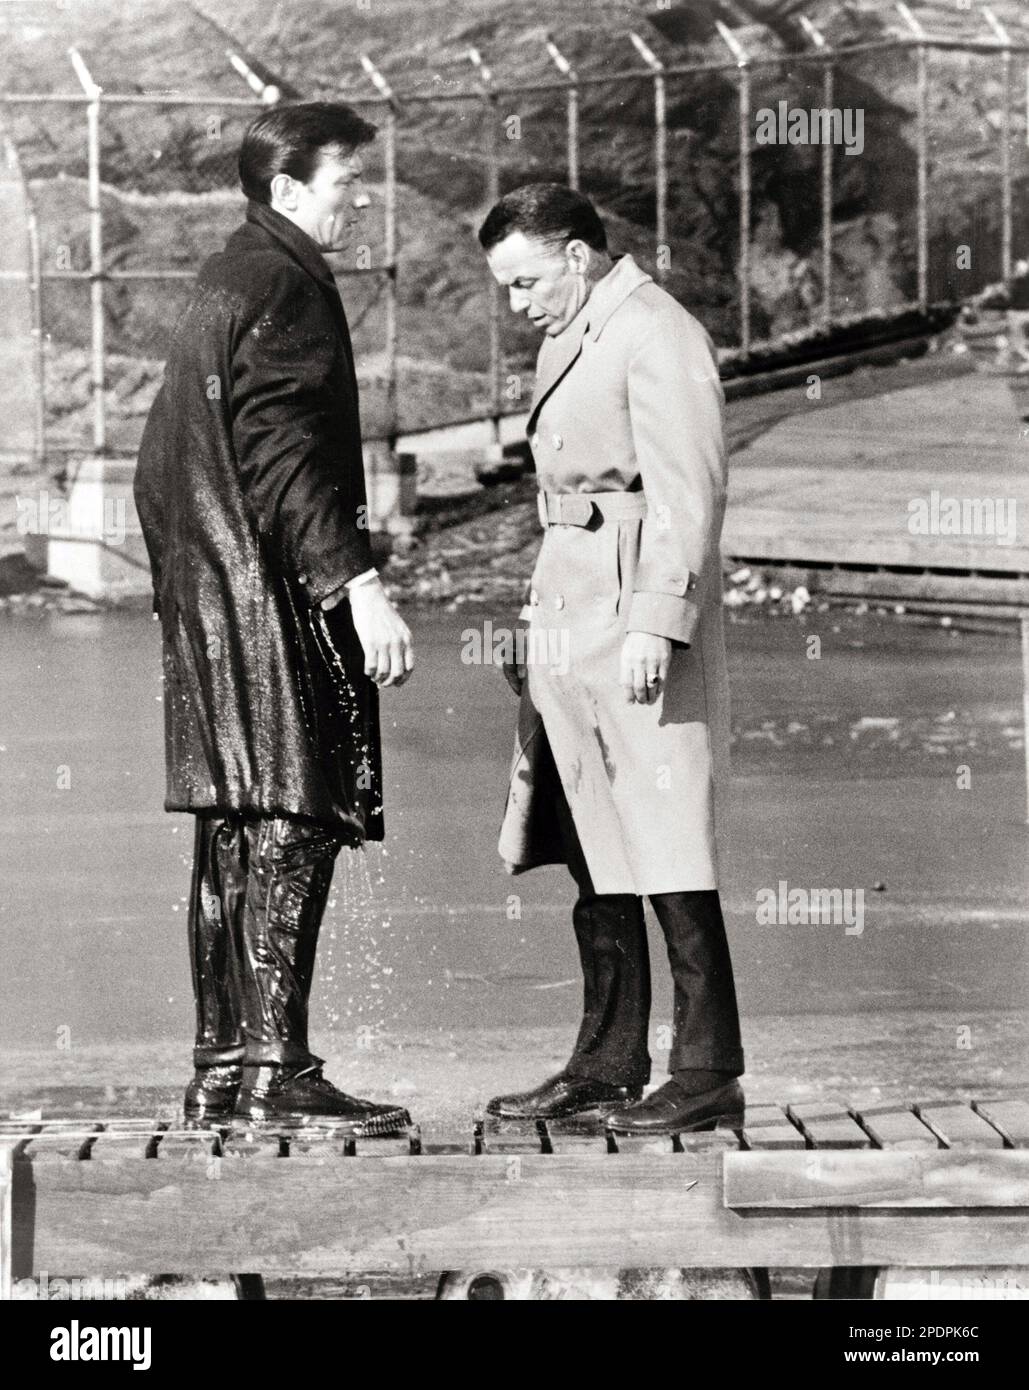 Laurence Harvey (left) and Frank Sinatra (right) filming a scene from The Manchurian Candidate in Central Park, New York Stock Photo